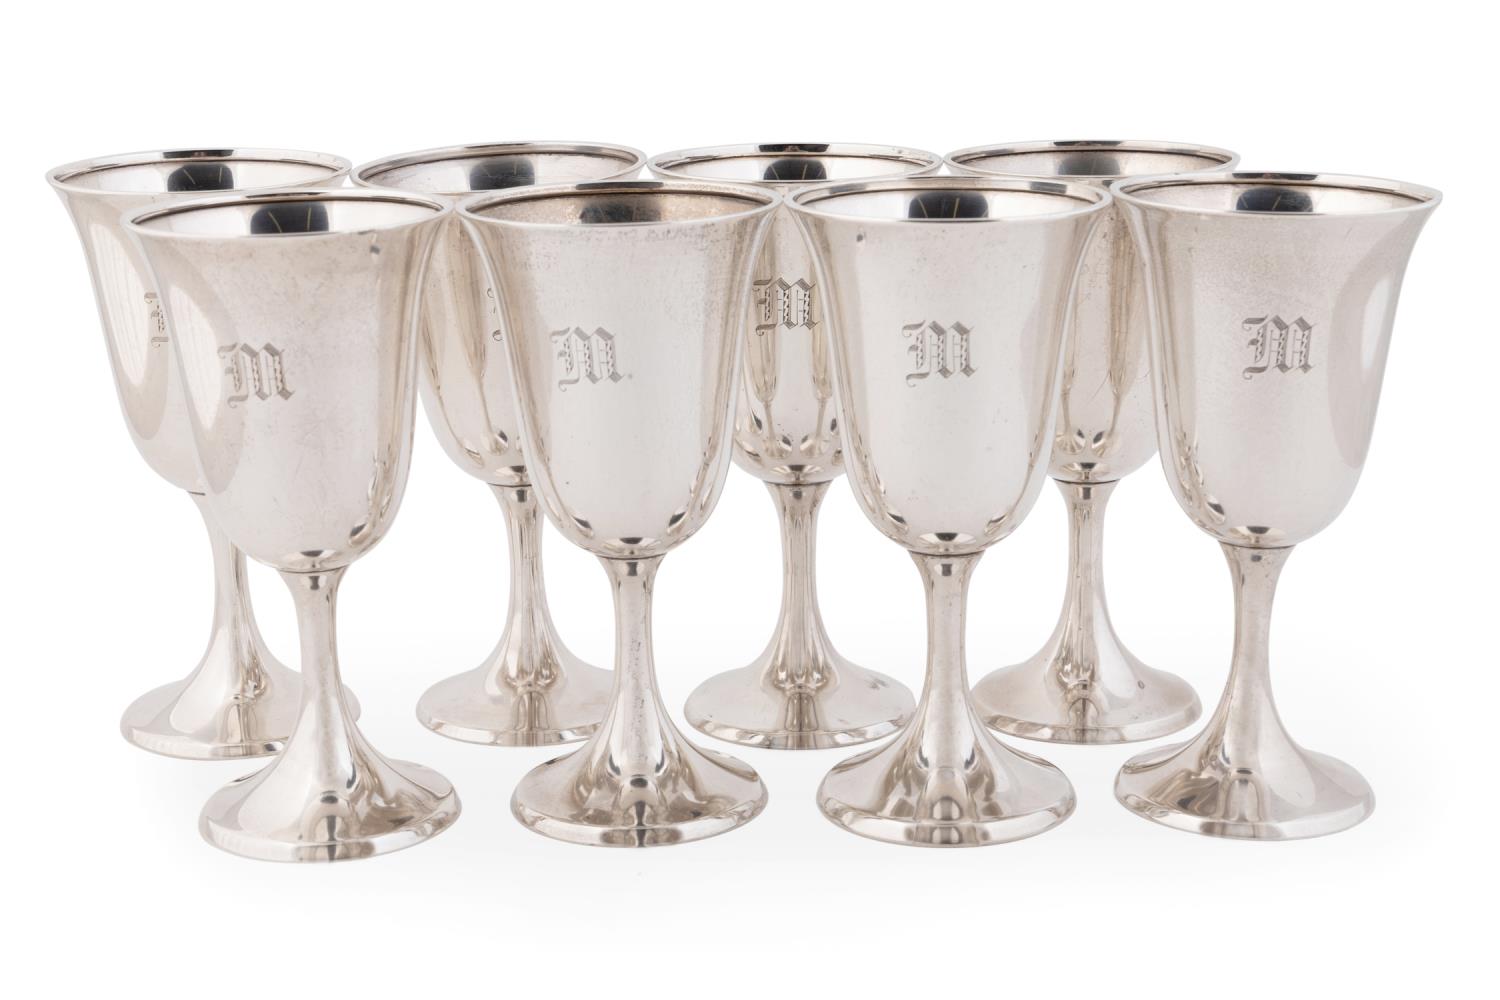 EIGHT STERLING SILVER WATER GOBLETS 29f6b6